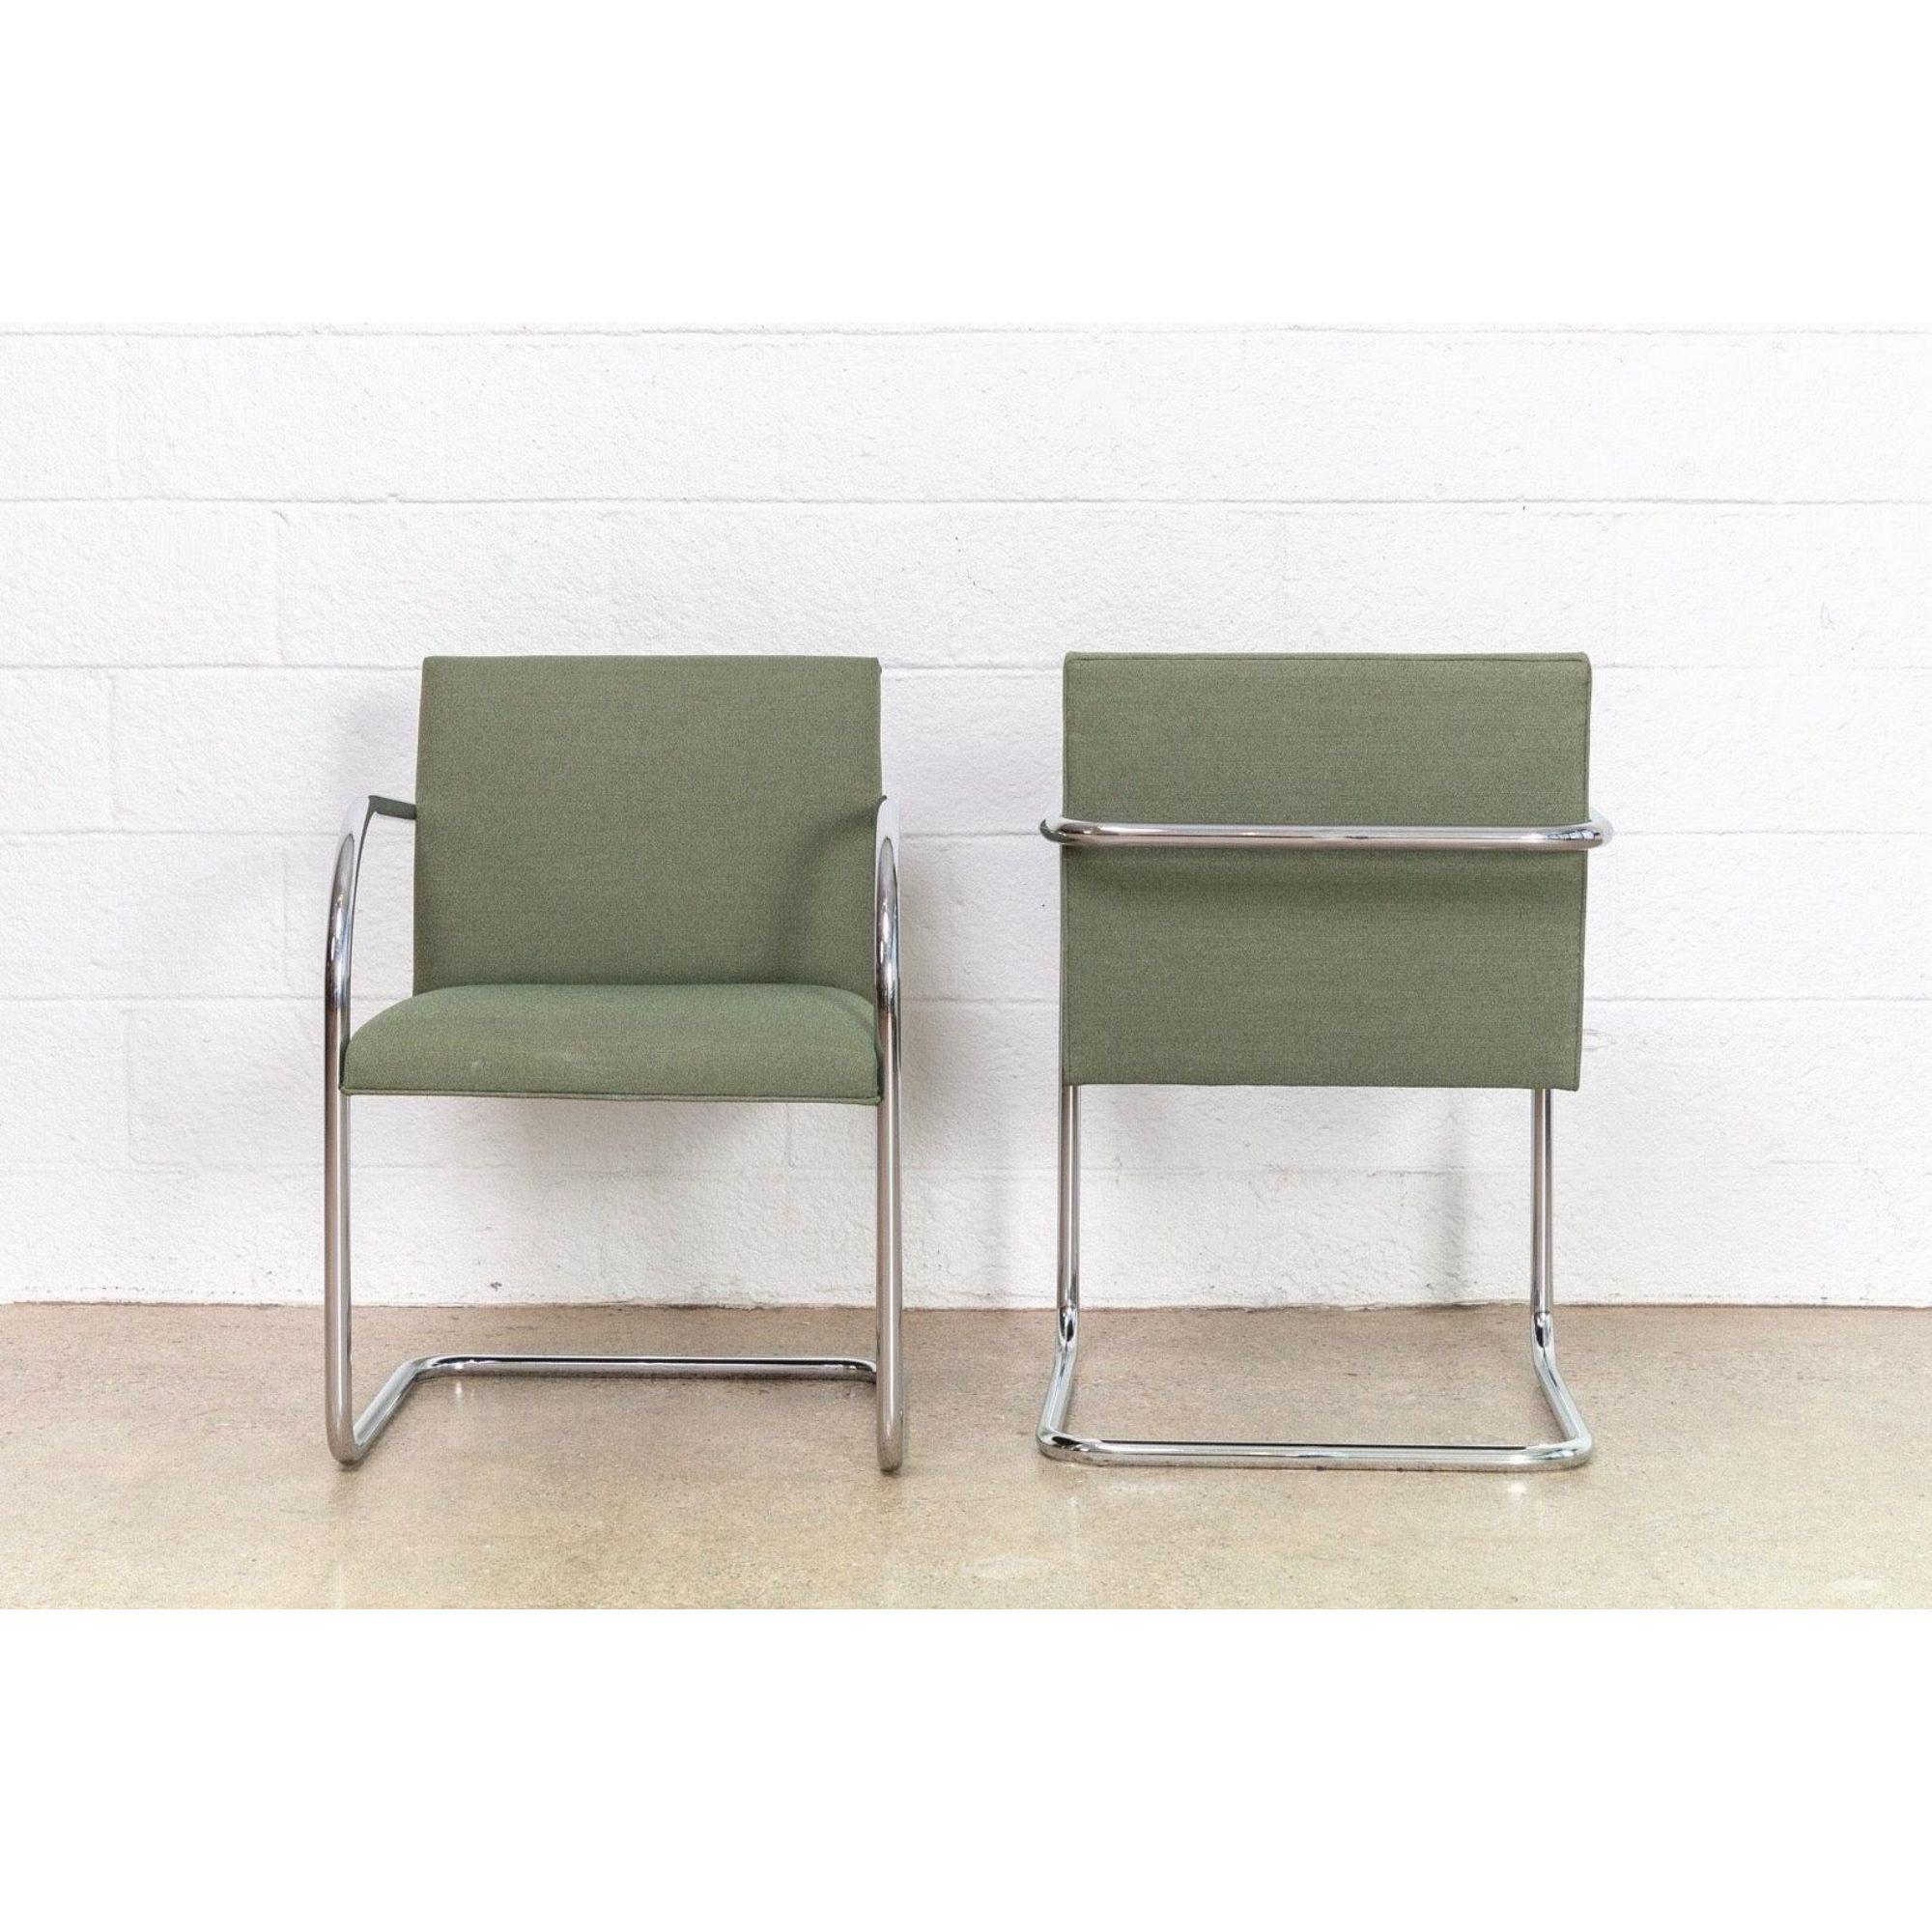 20th Century Bauhaus Green Brno Tubular Cantilever Dining Chairs by Mies Van Der Rohe